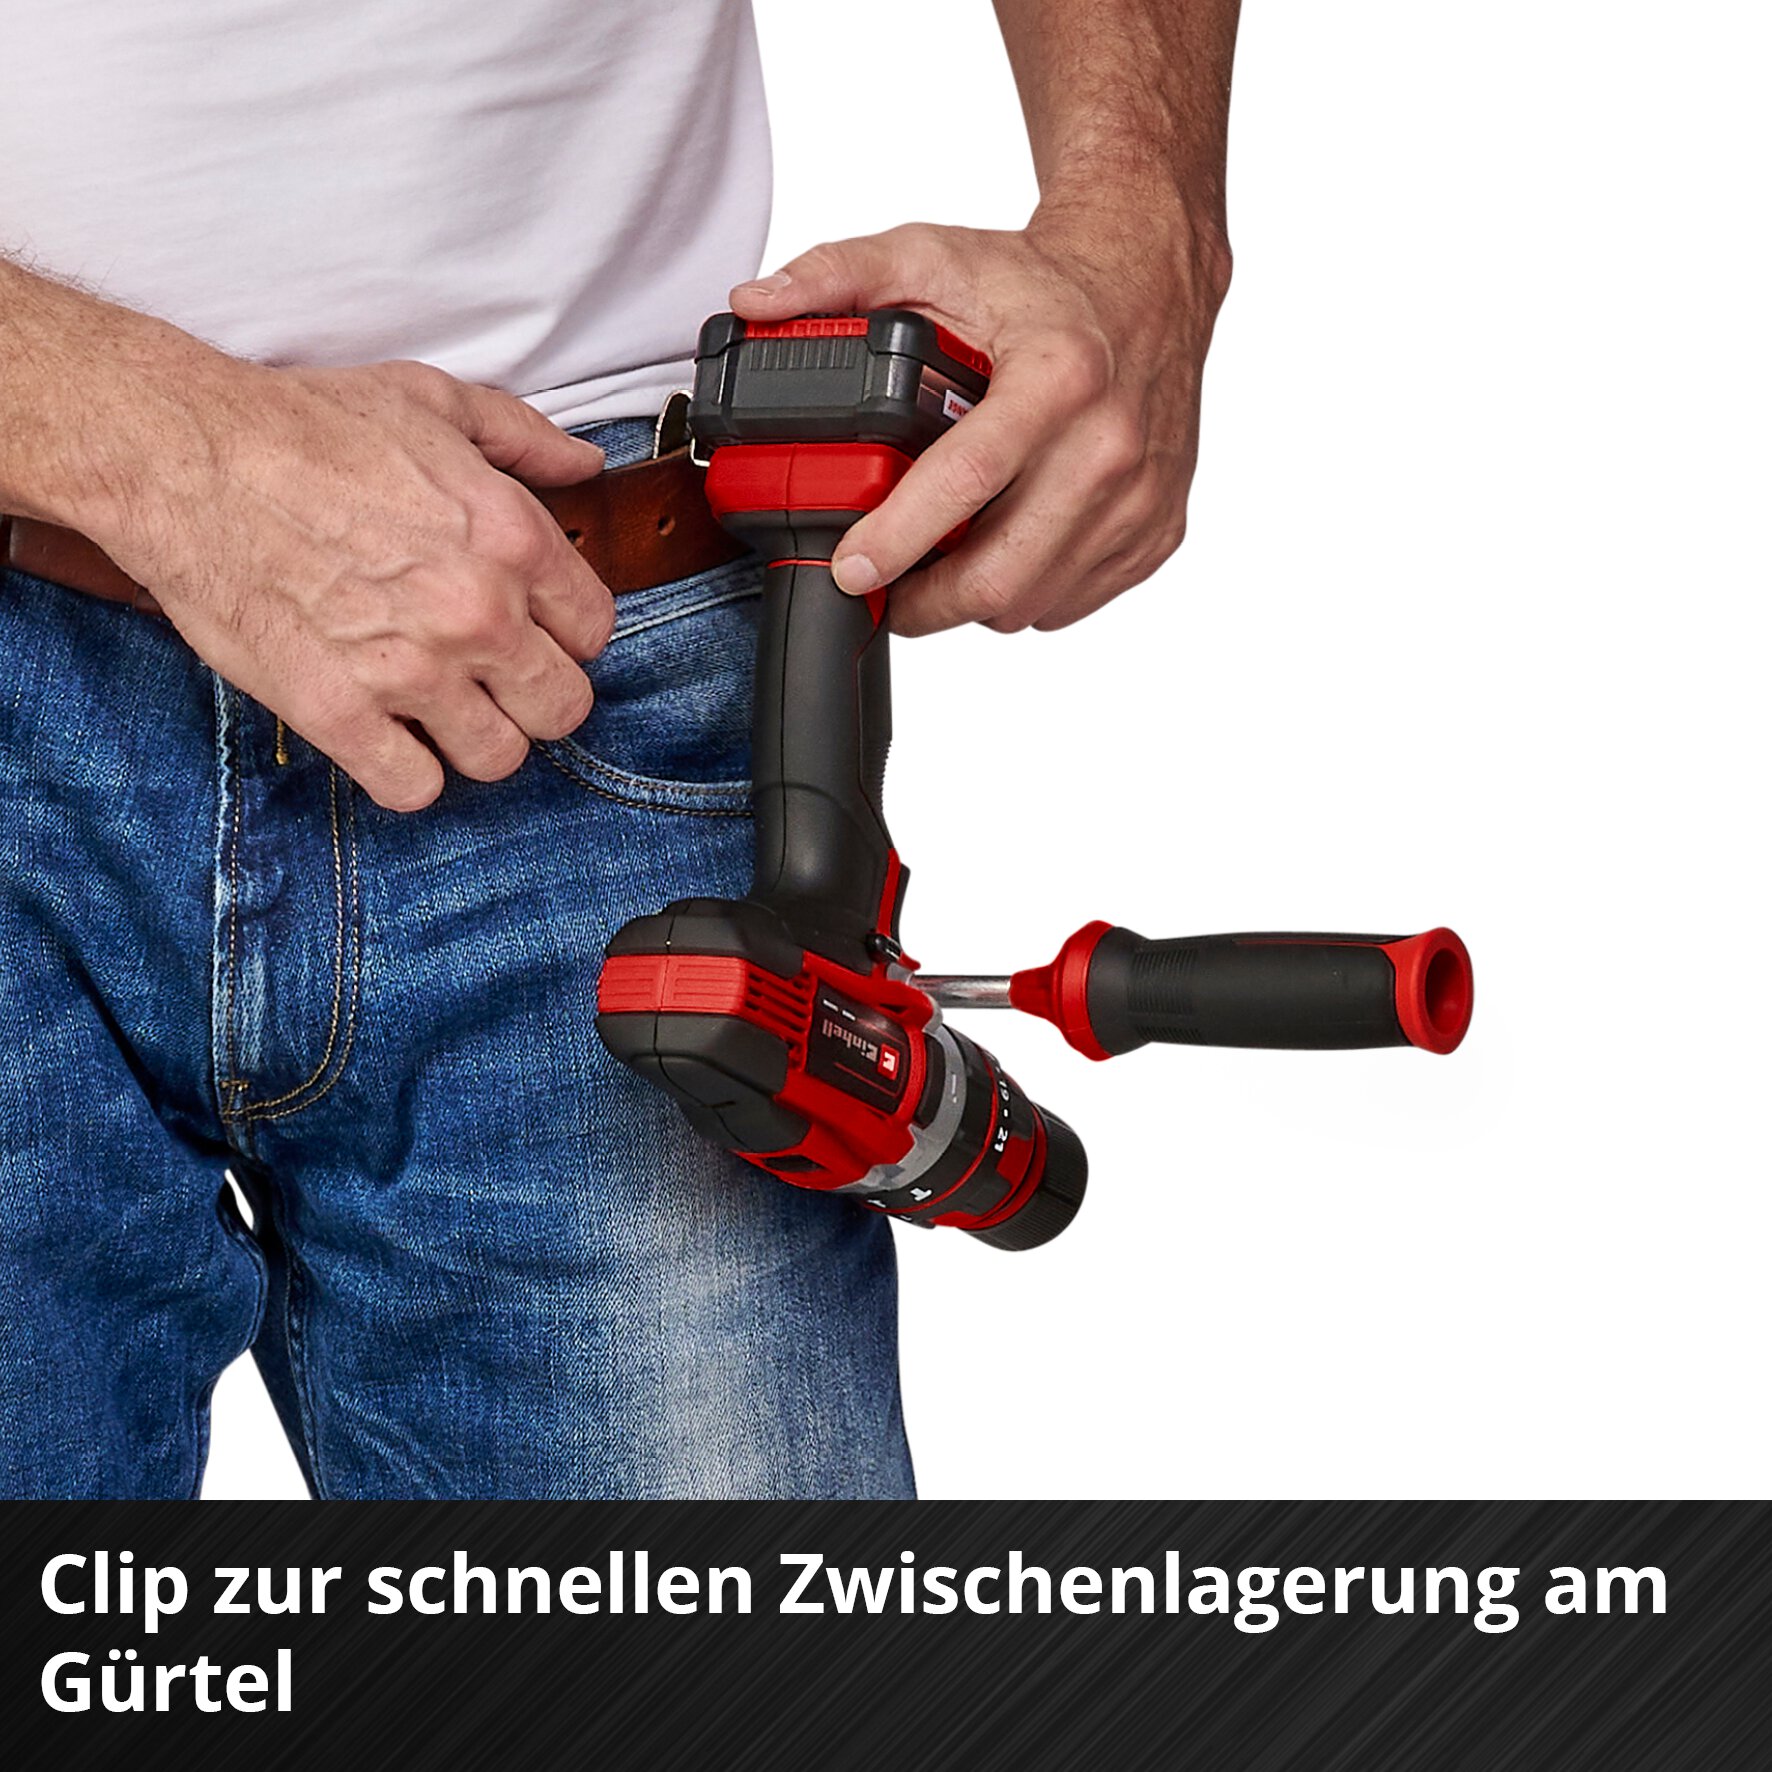 einhell-expert-cordless-impact-drill-4513926-detail_image-004